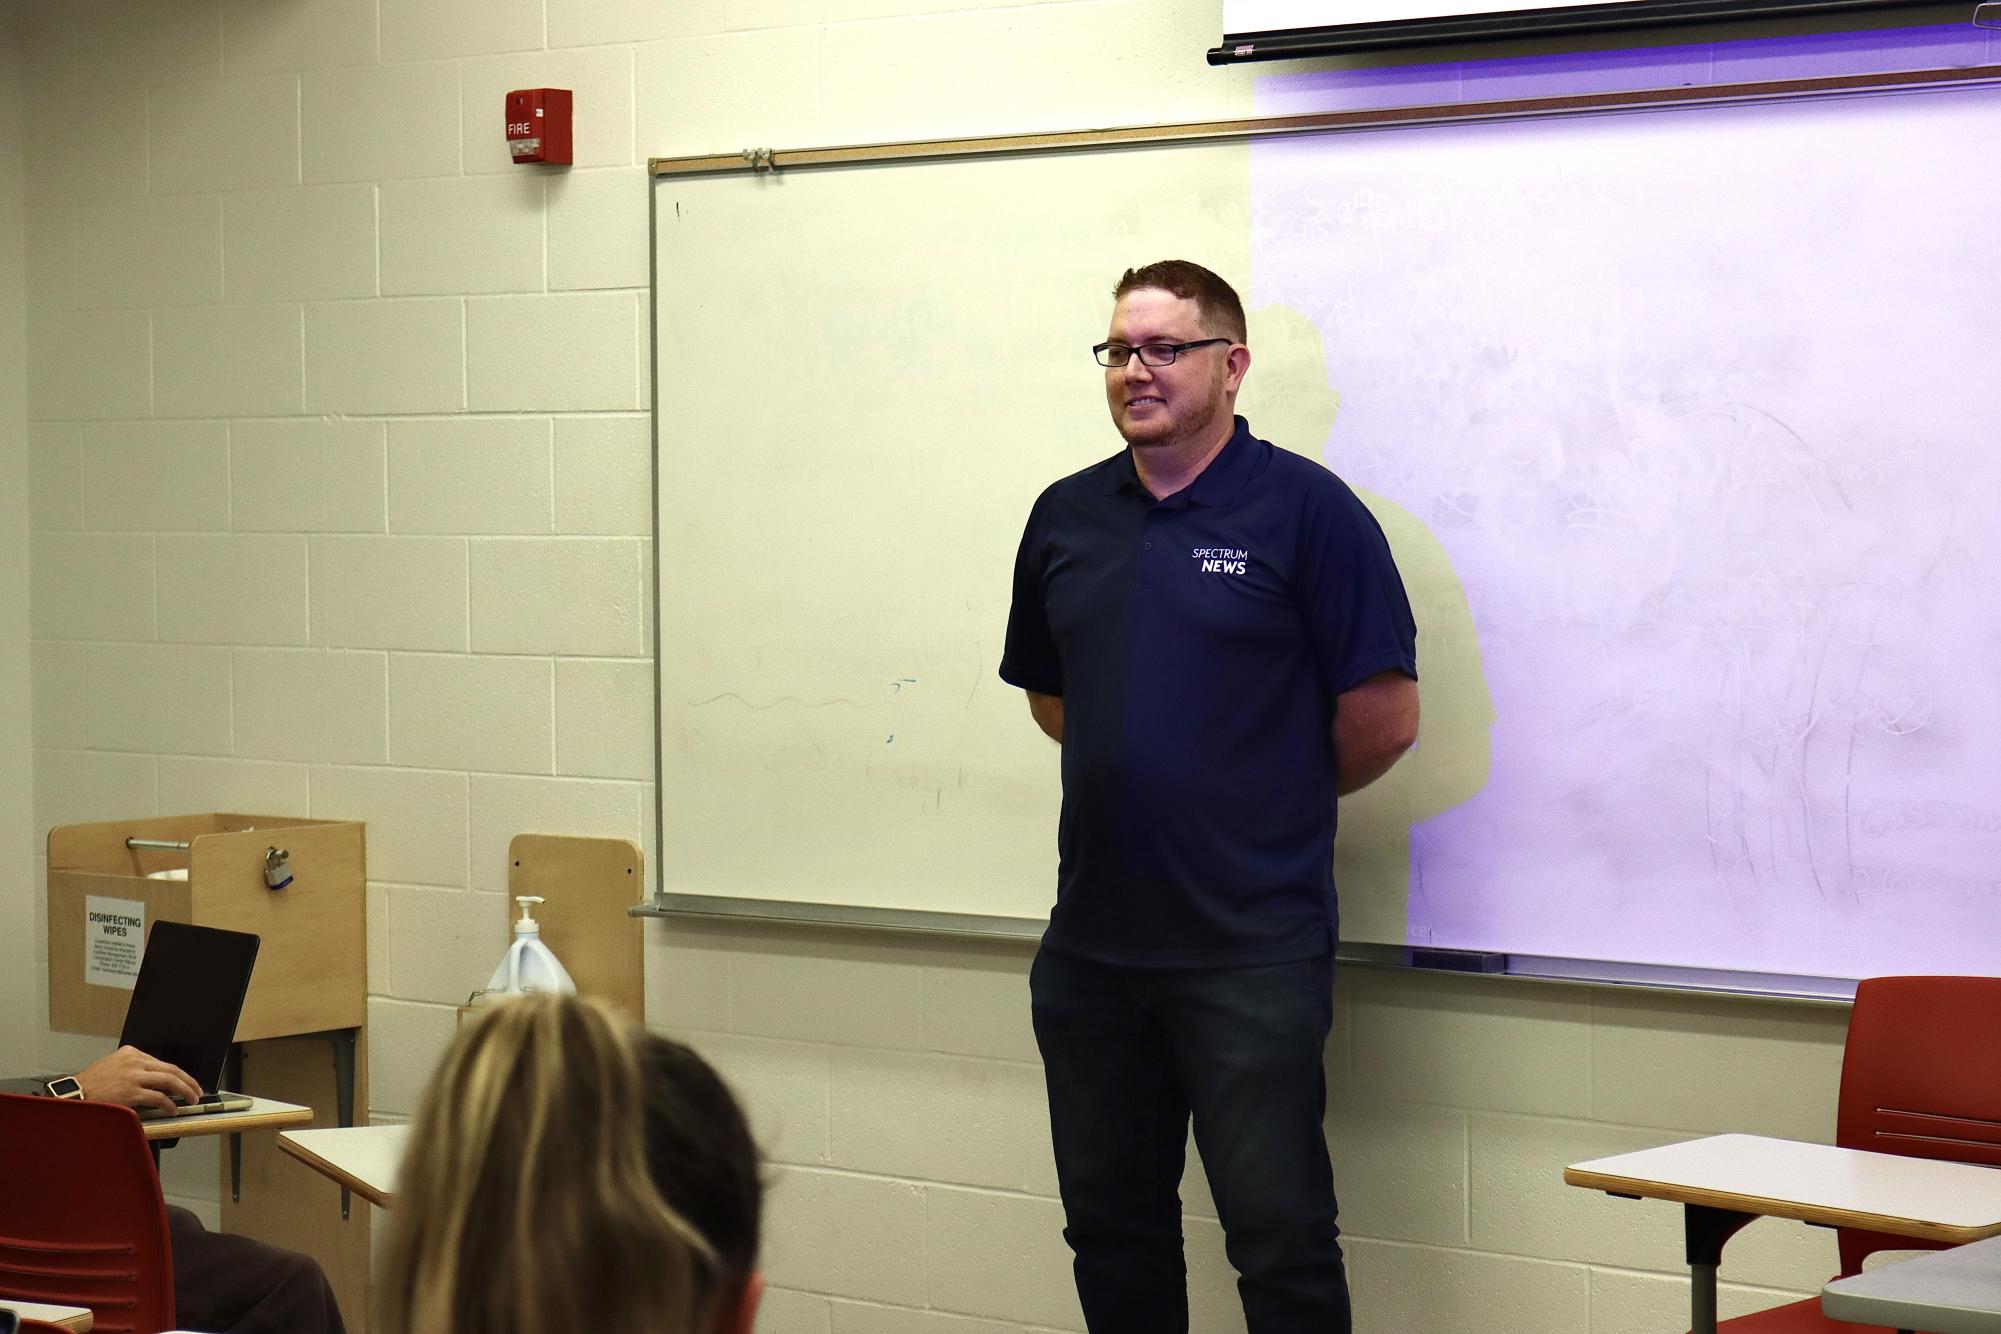 Brian McInnis wrote sports stories for the Star-Advertiser for more than a decade. He shared those experiences with the Jour 323 Sports Media class this Fall.